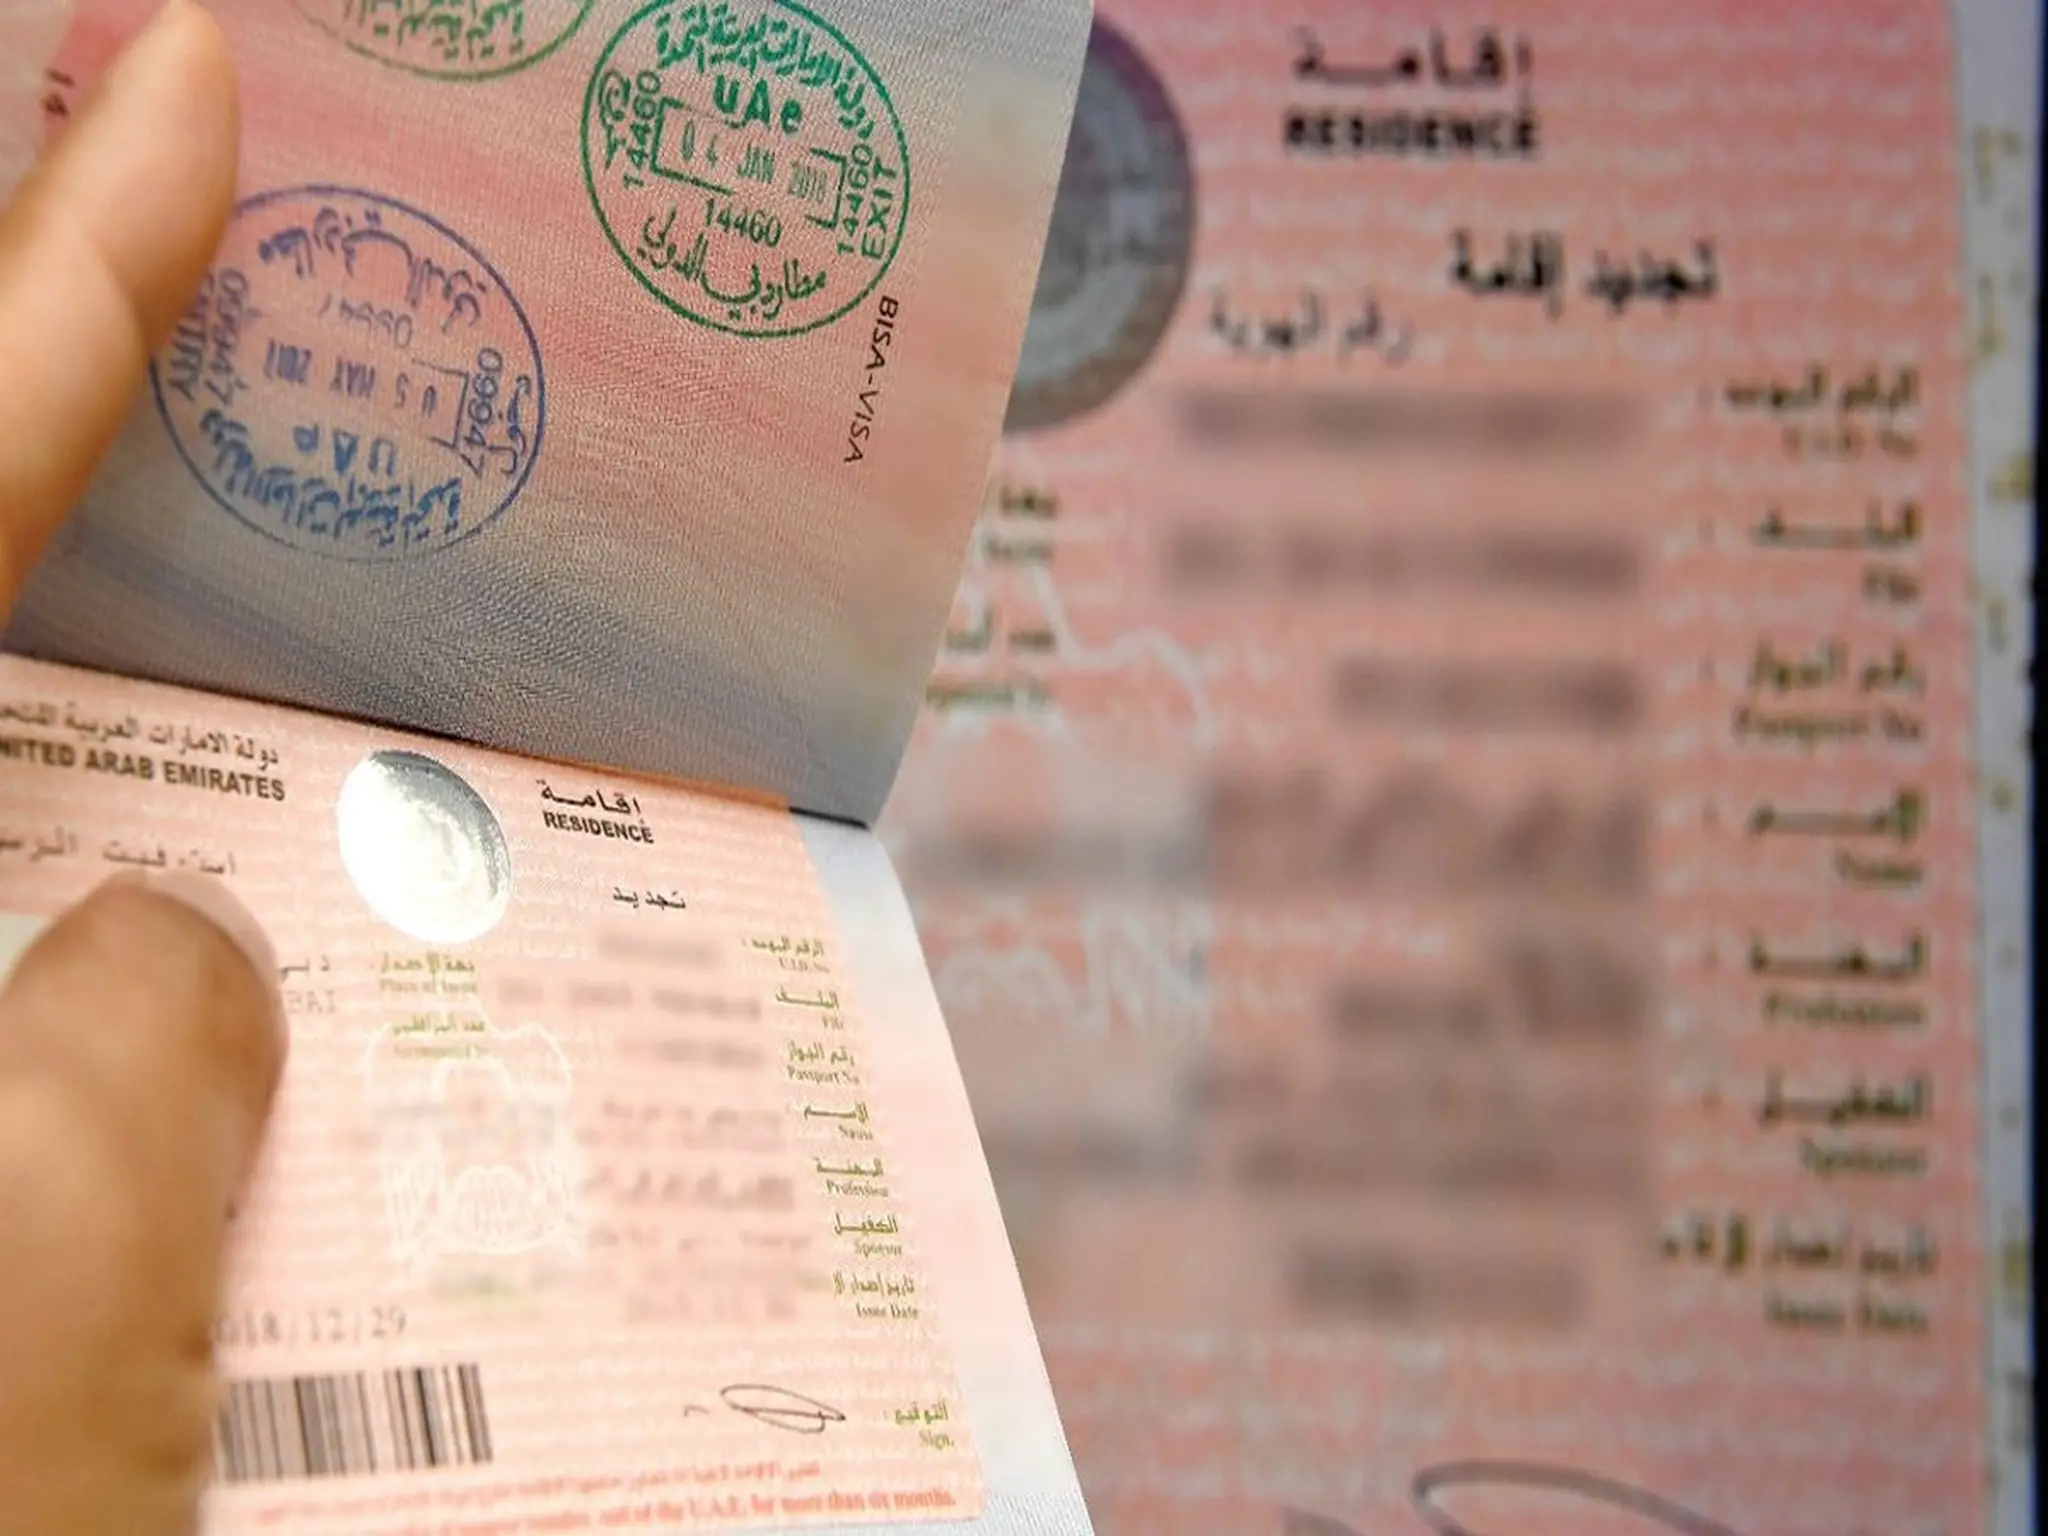 UAE issues a decision regarding work visas to ease demographic diversity requirements